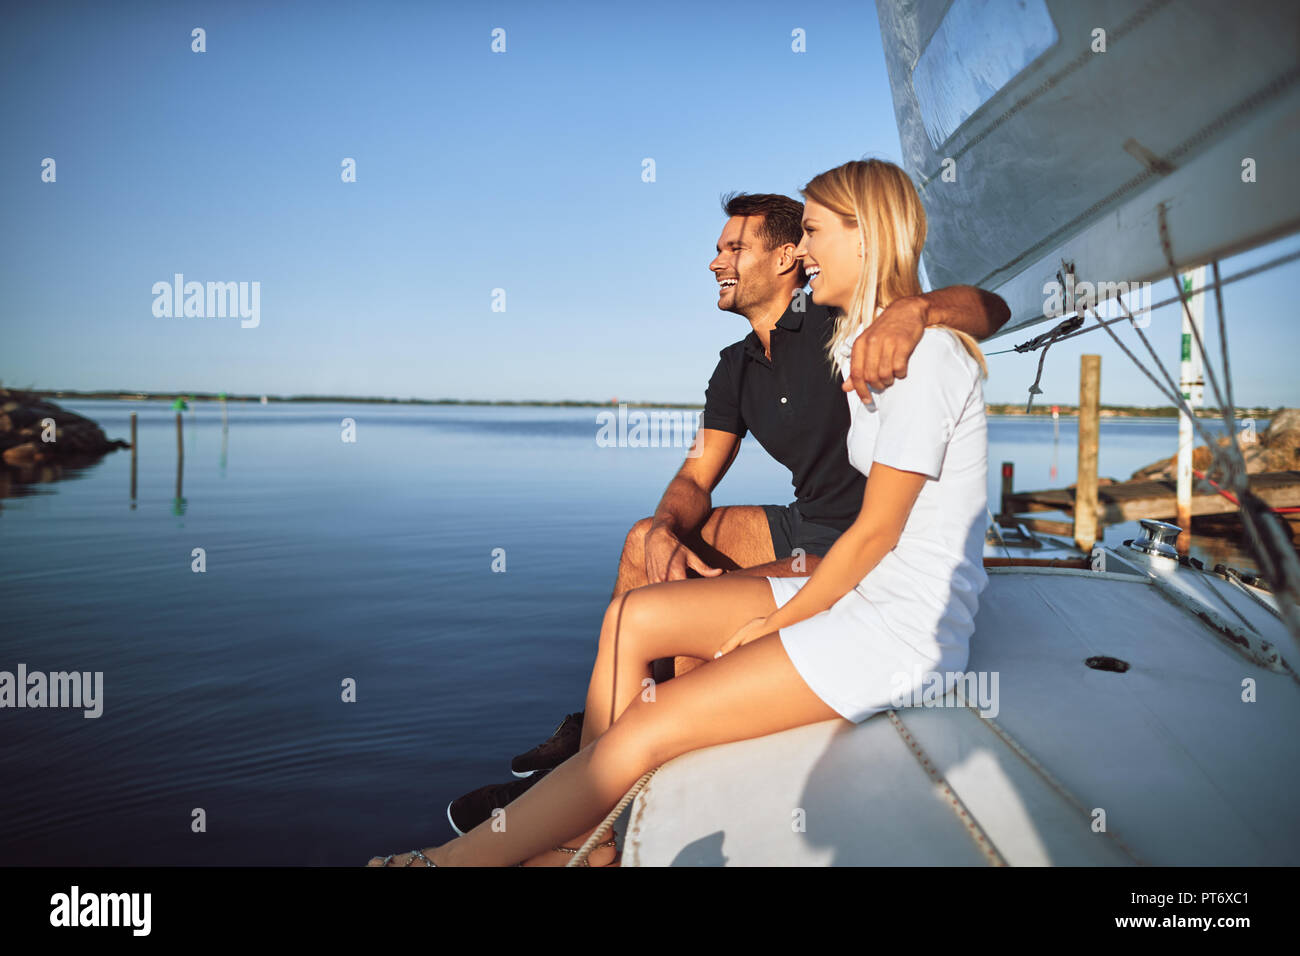 Laughing young couple having fun and enjoying the ocean view while sitting together on the deck of their boat Stock Photo